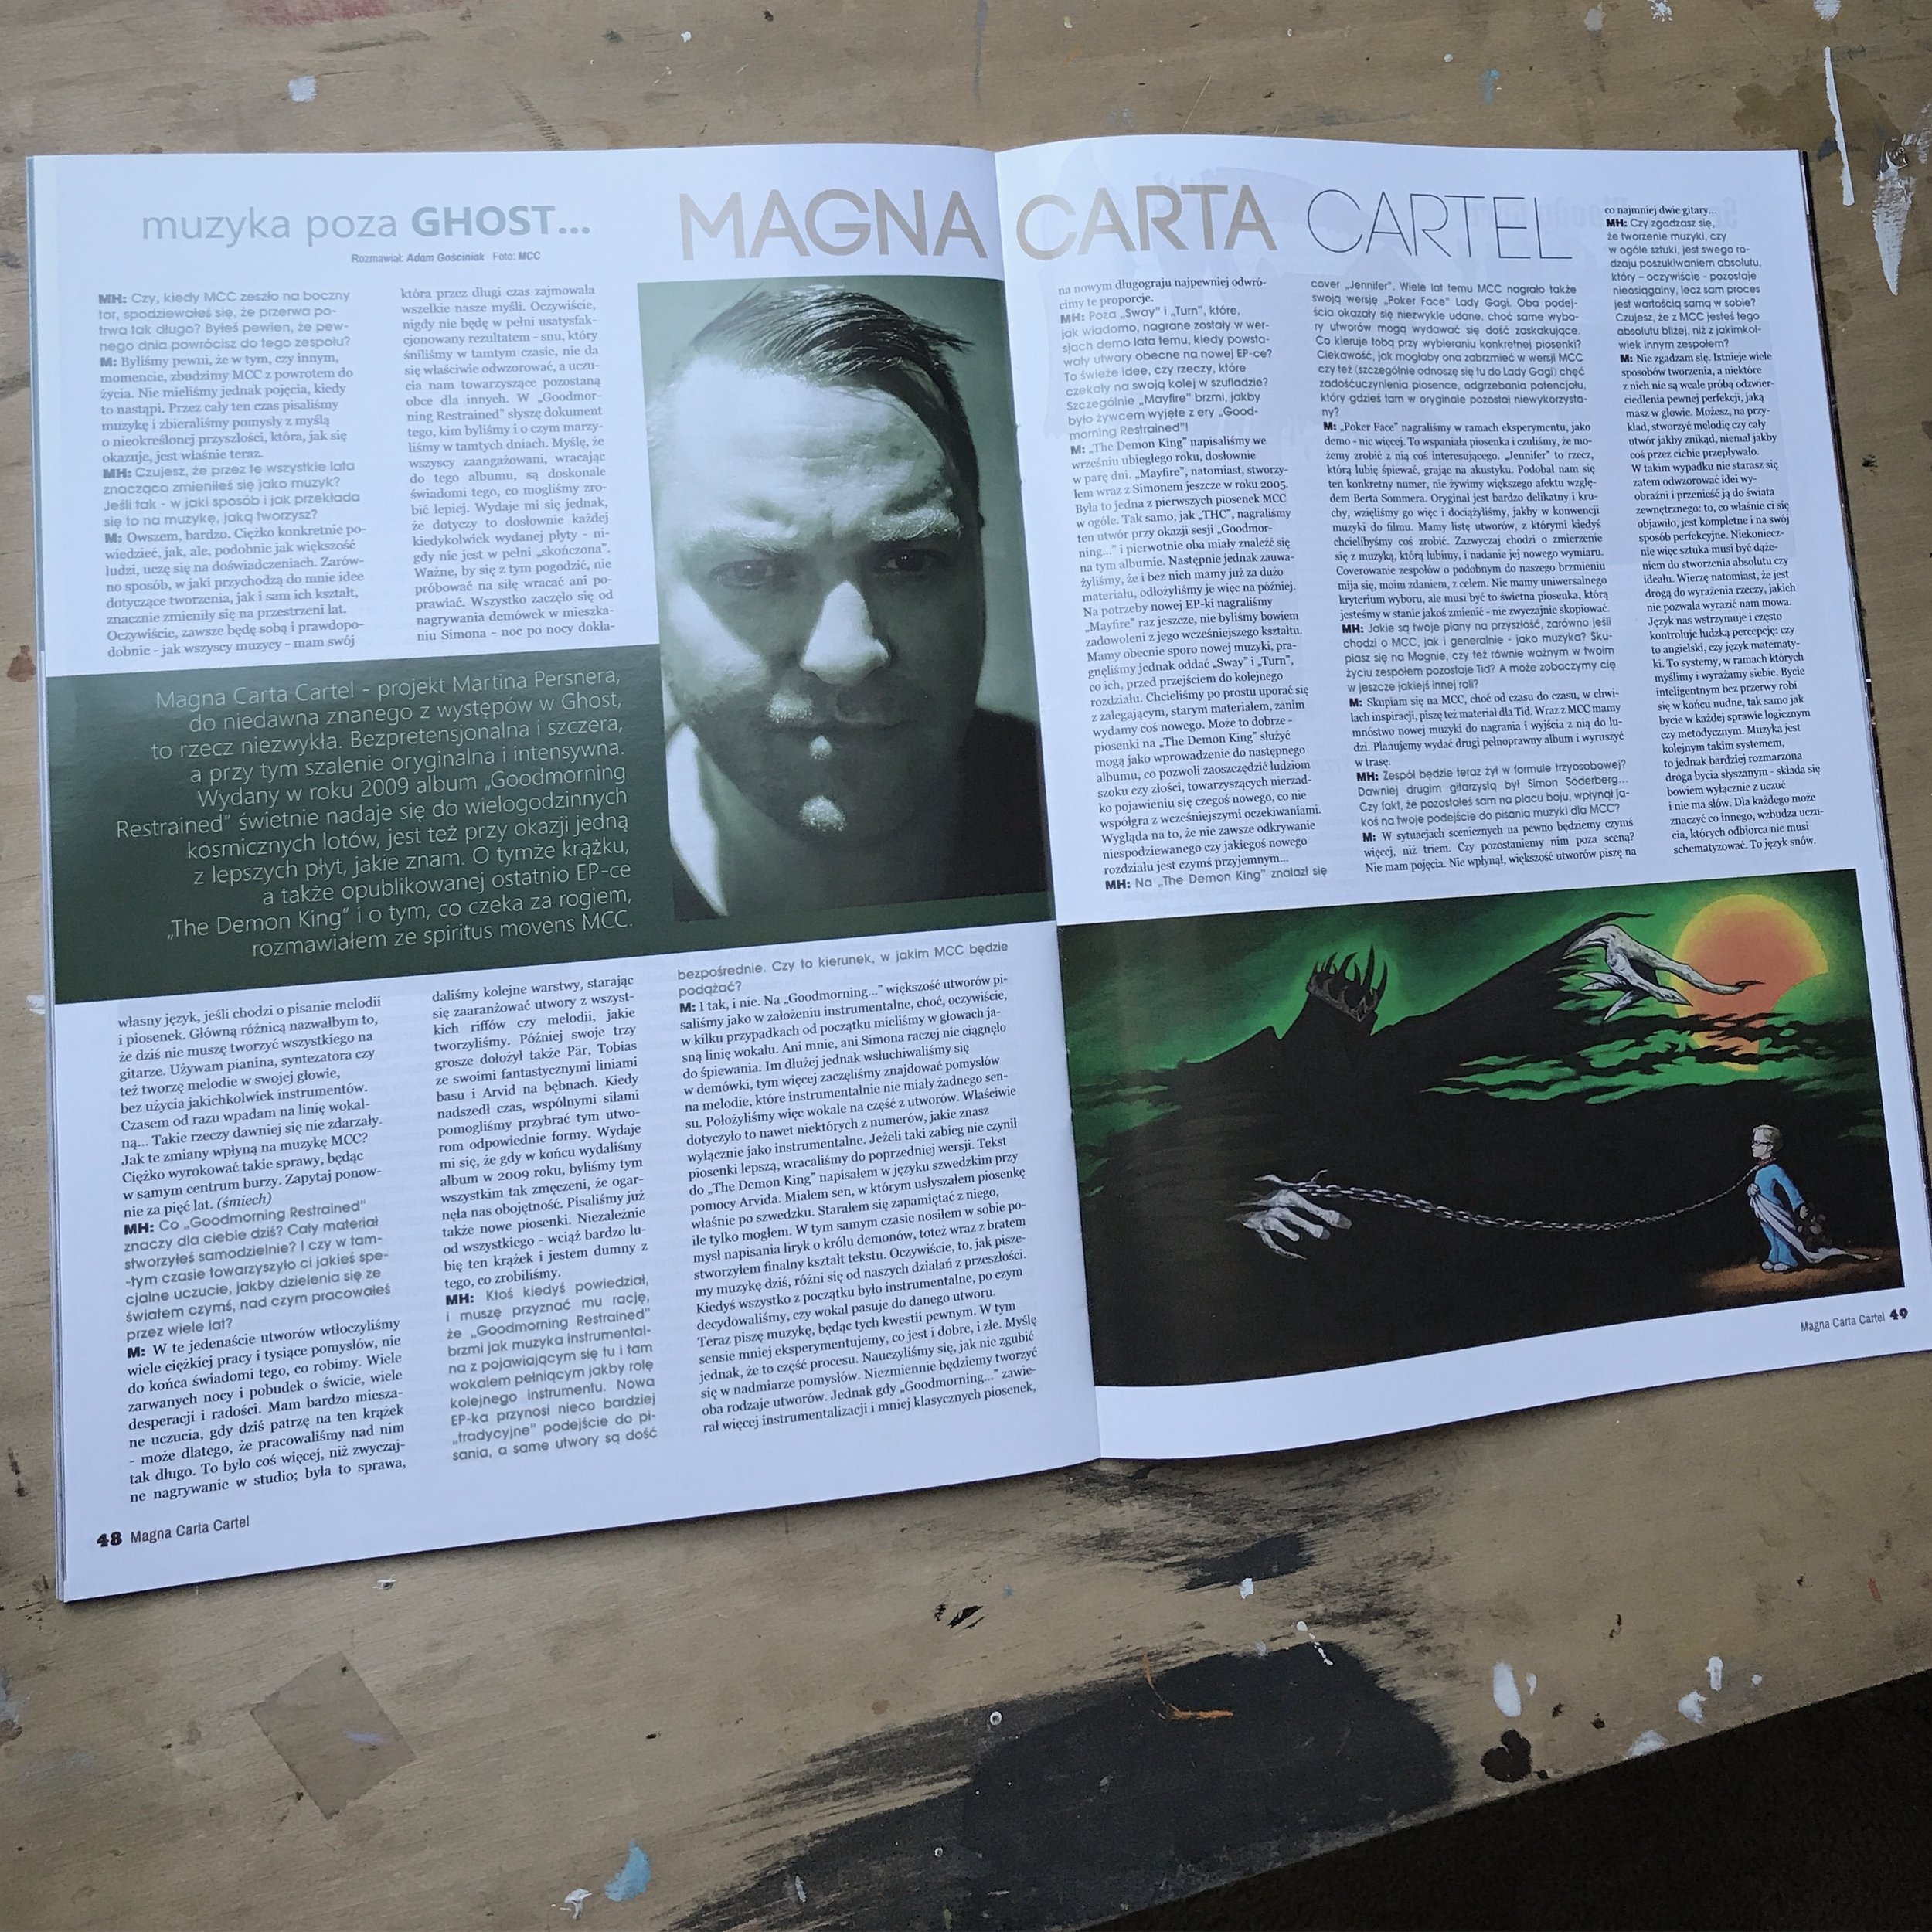   Metal Hammer Poland magazine  | July 2017  Martin Persner interview and Magna Carta Cartel   The Demon King EP review 